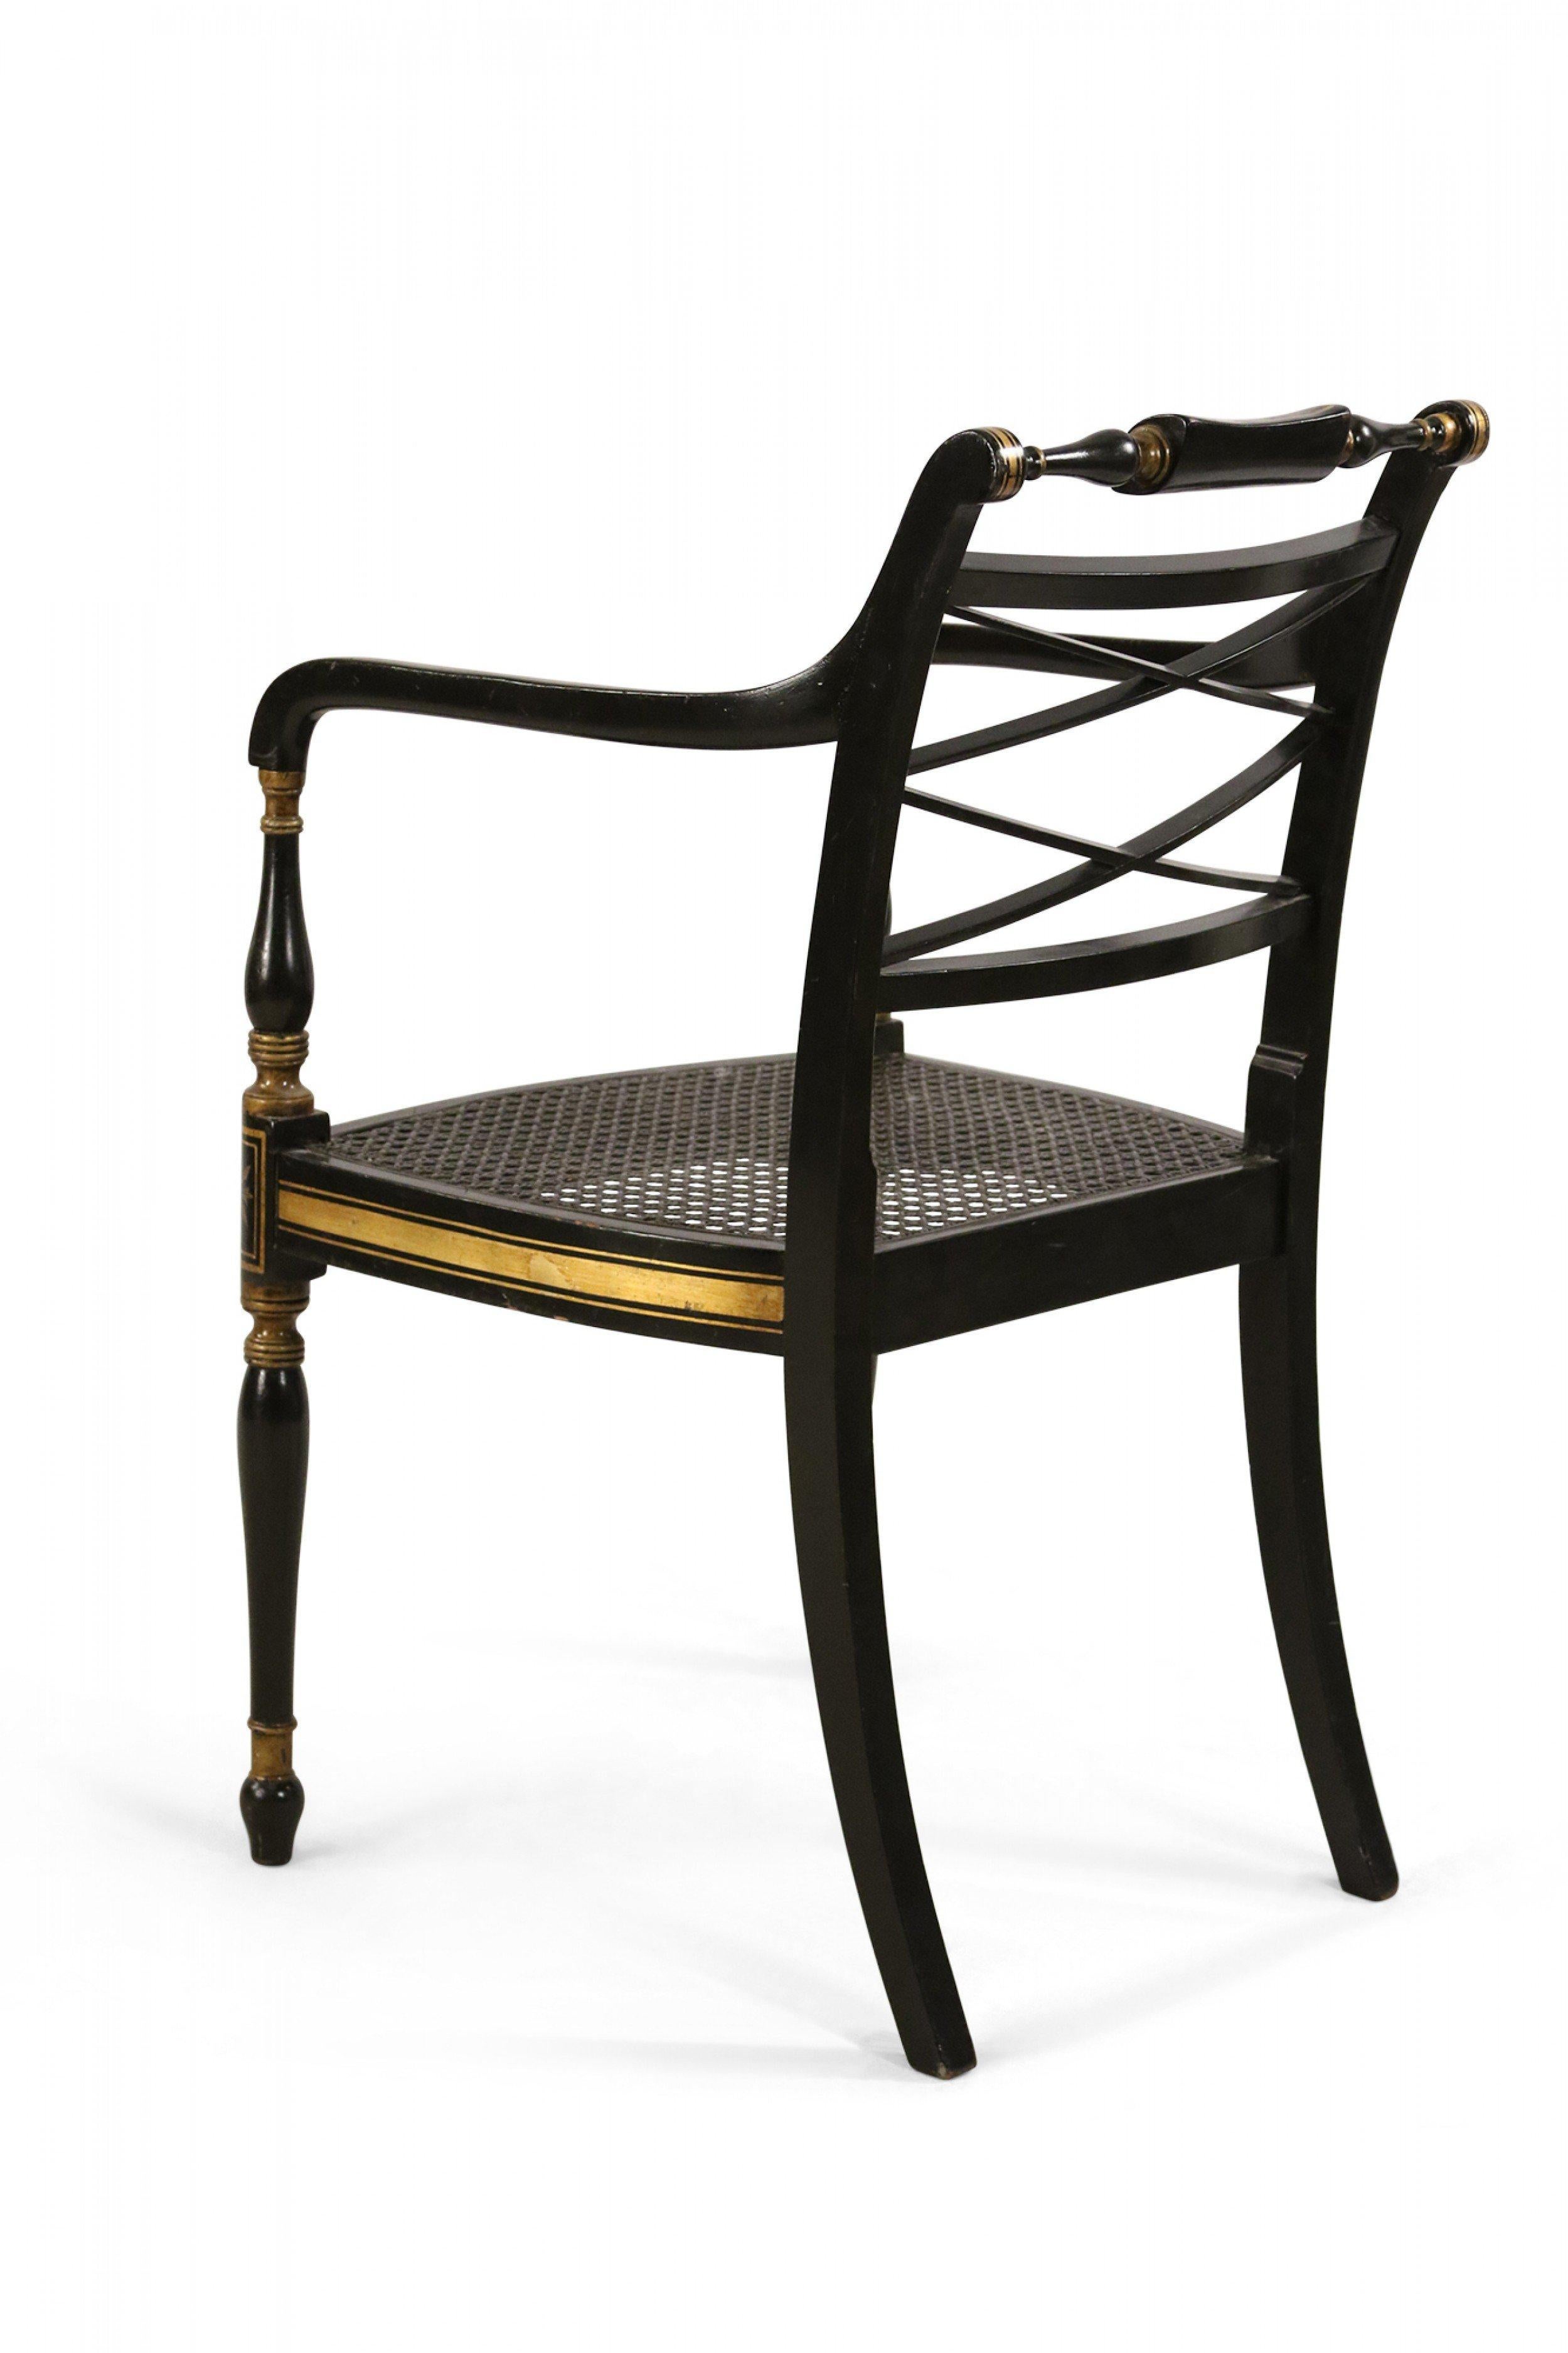 English Regency-style (20th Century) black and gold painted armchair with x-shaped backs, turned top rails and arms, and black painted cane seats.
  